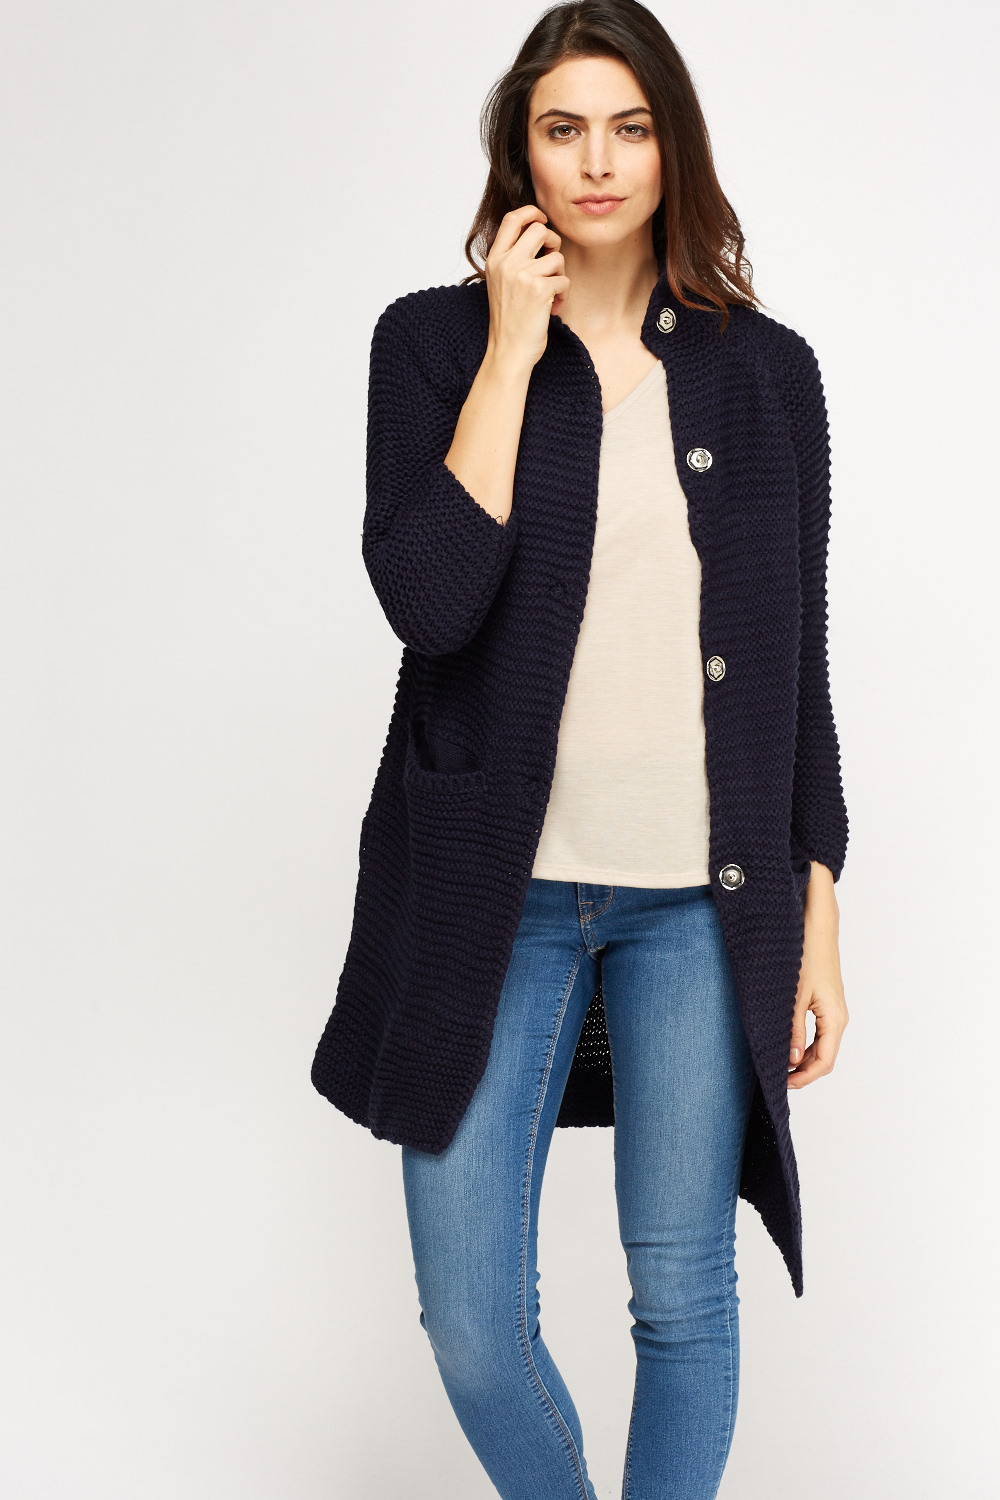 Textured Button Up Longline Cardigan - Just $7